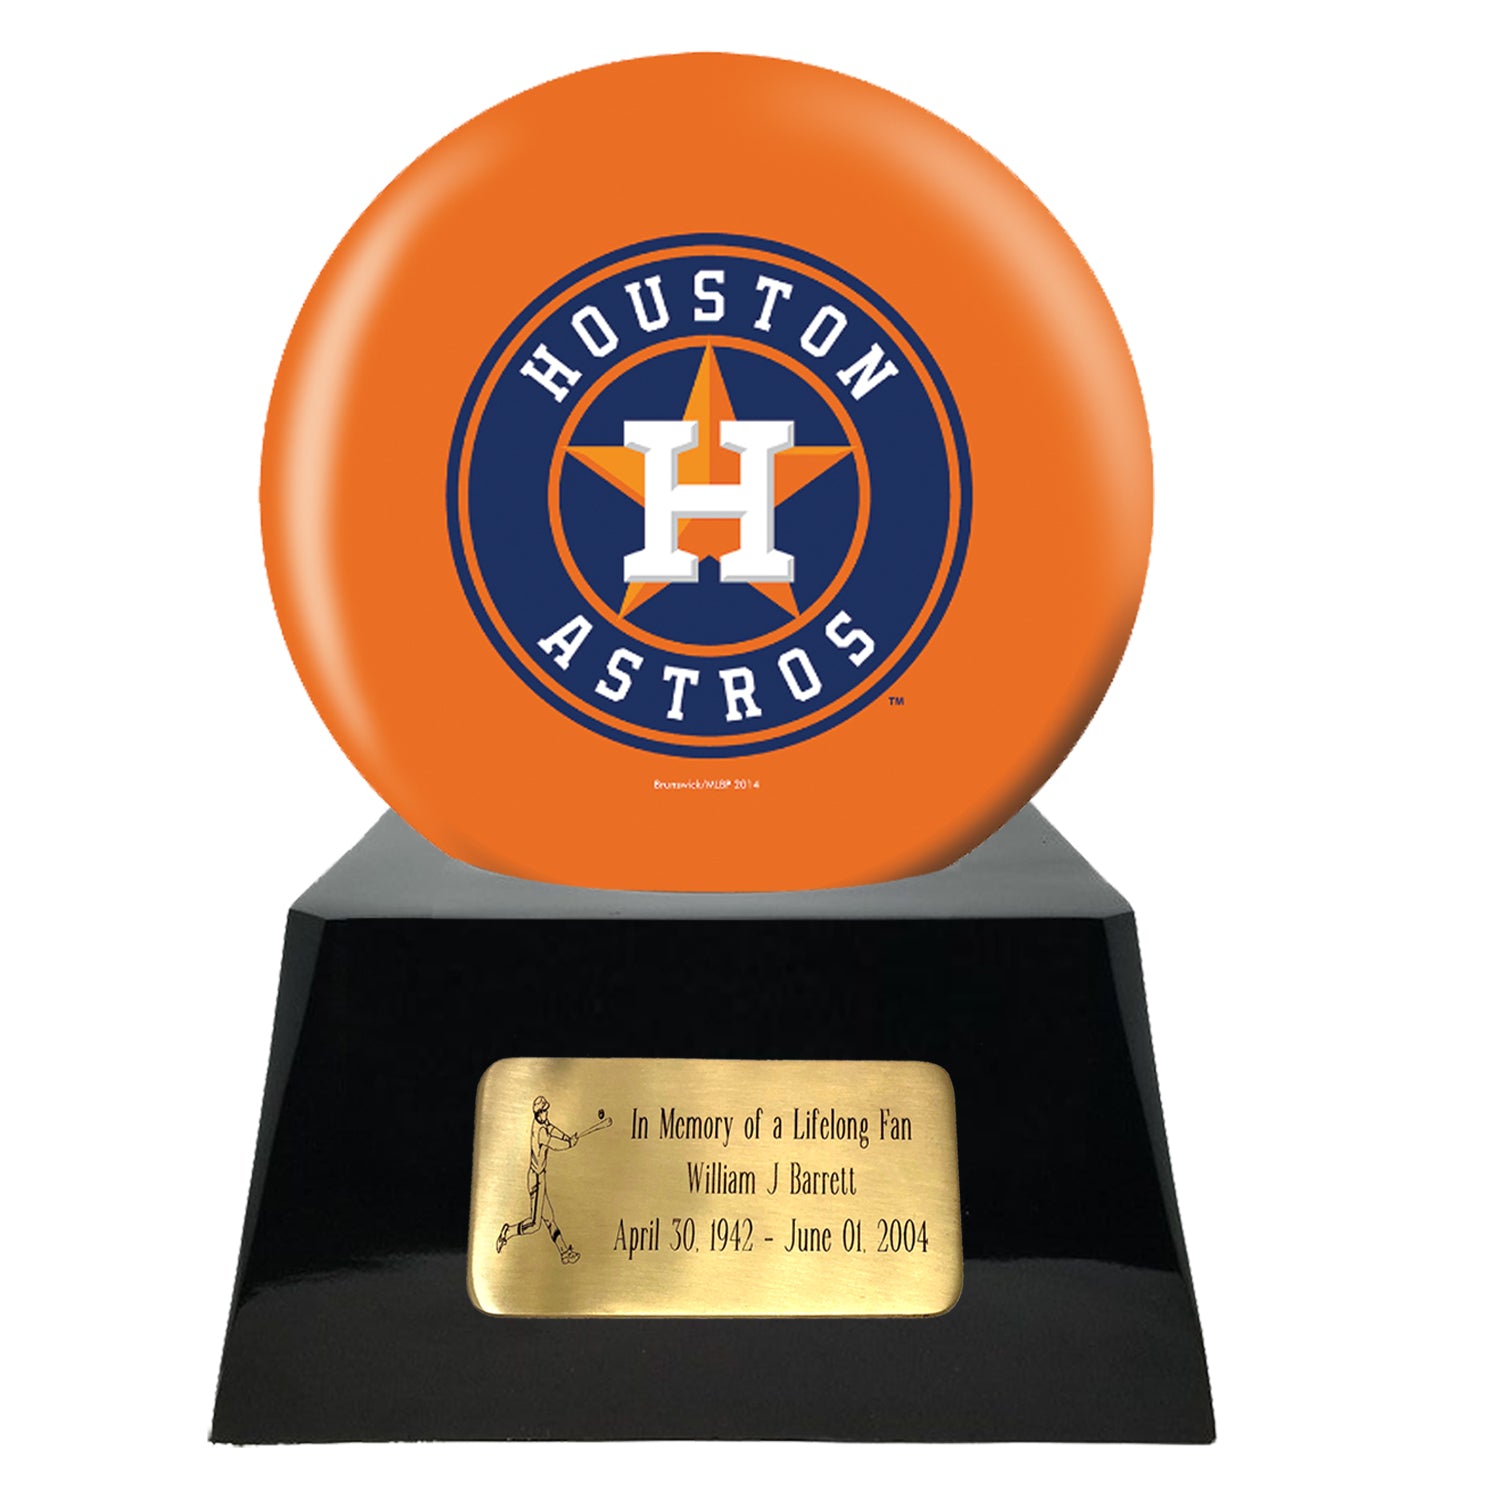 MLB - To infinity and beyond. These Houston Astros City